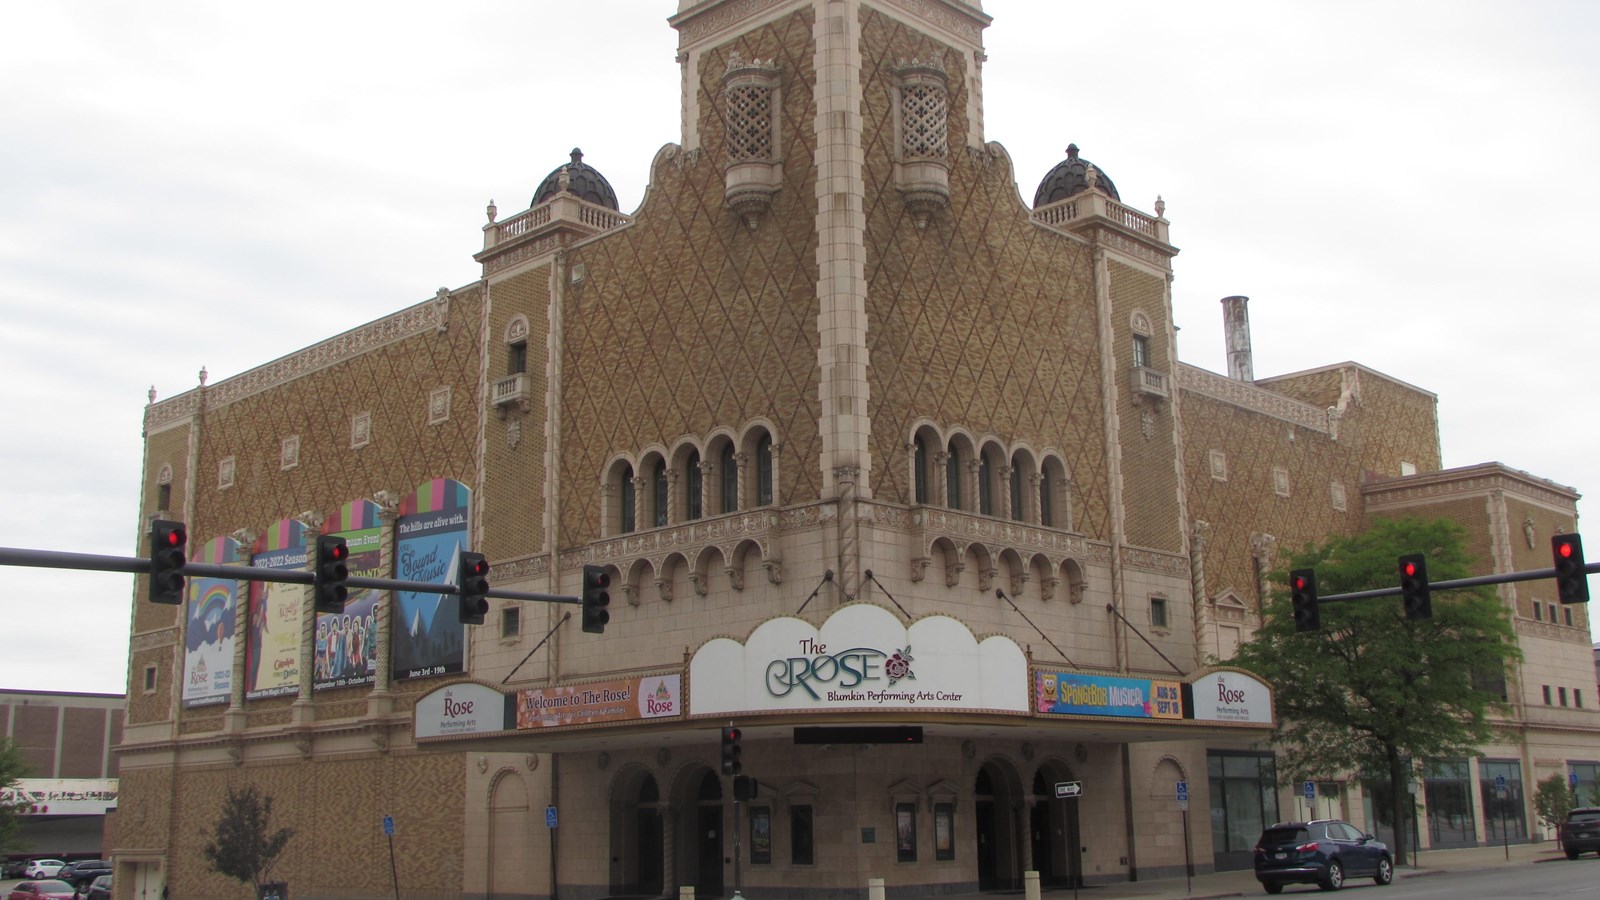 Corner theater building with large Moorish tower. Entrance located at corner of building.